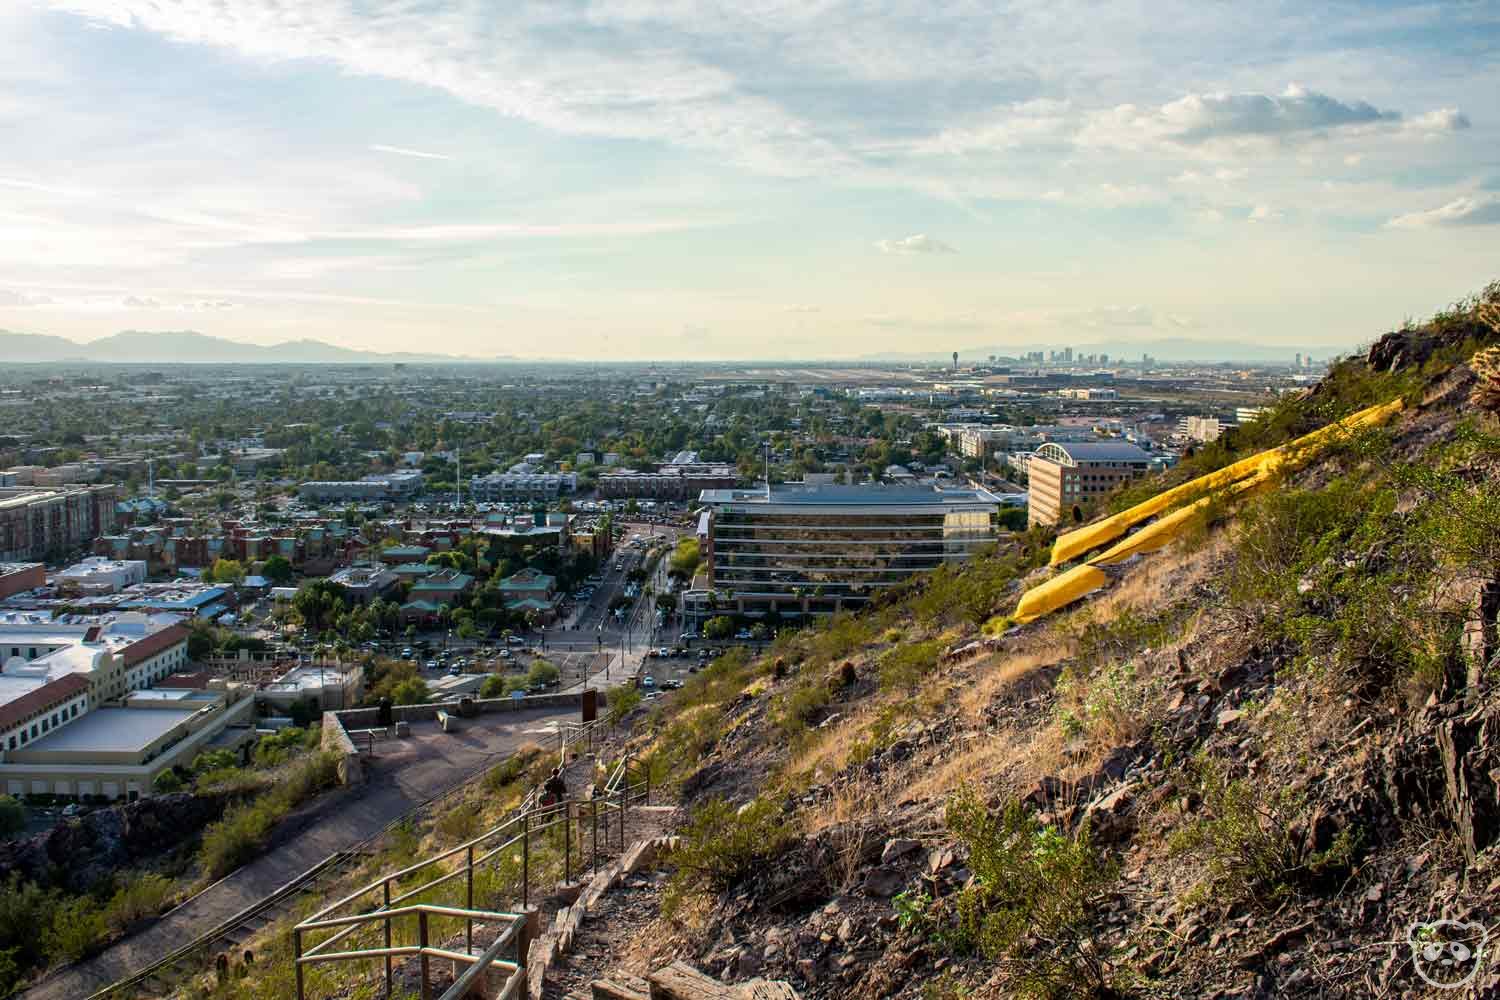 View of Tempe and Phoenix in Arizona from A Mountain